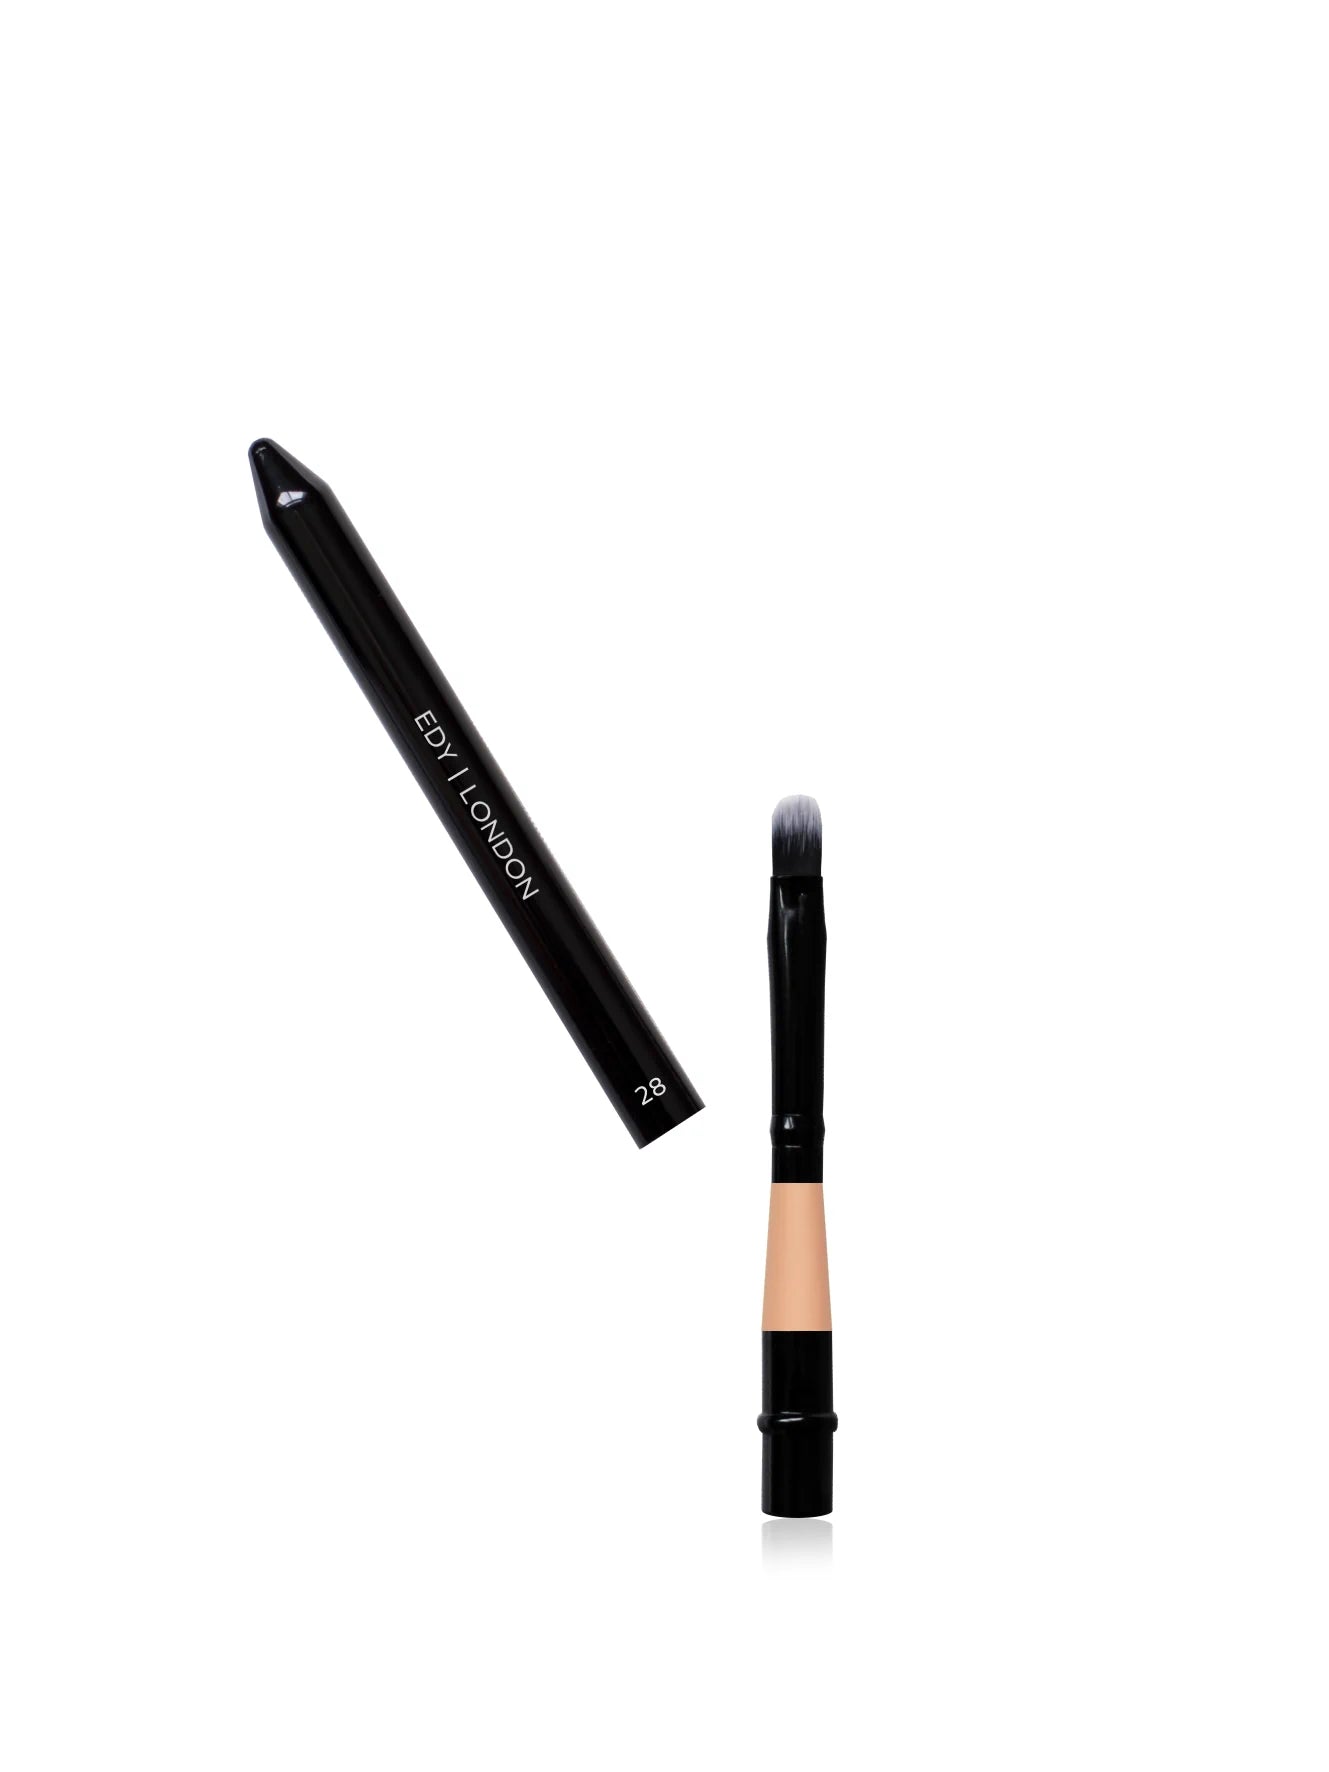 Lip Brush with Cover 28 Make-up Brush EDY LONDON Pale Pink   [variant_option4] EDY LONDON PRODUCTS UK shop.edy.london